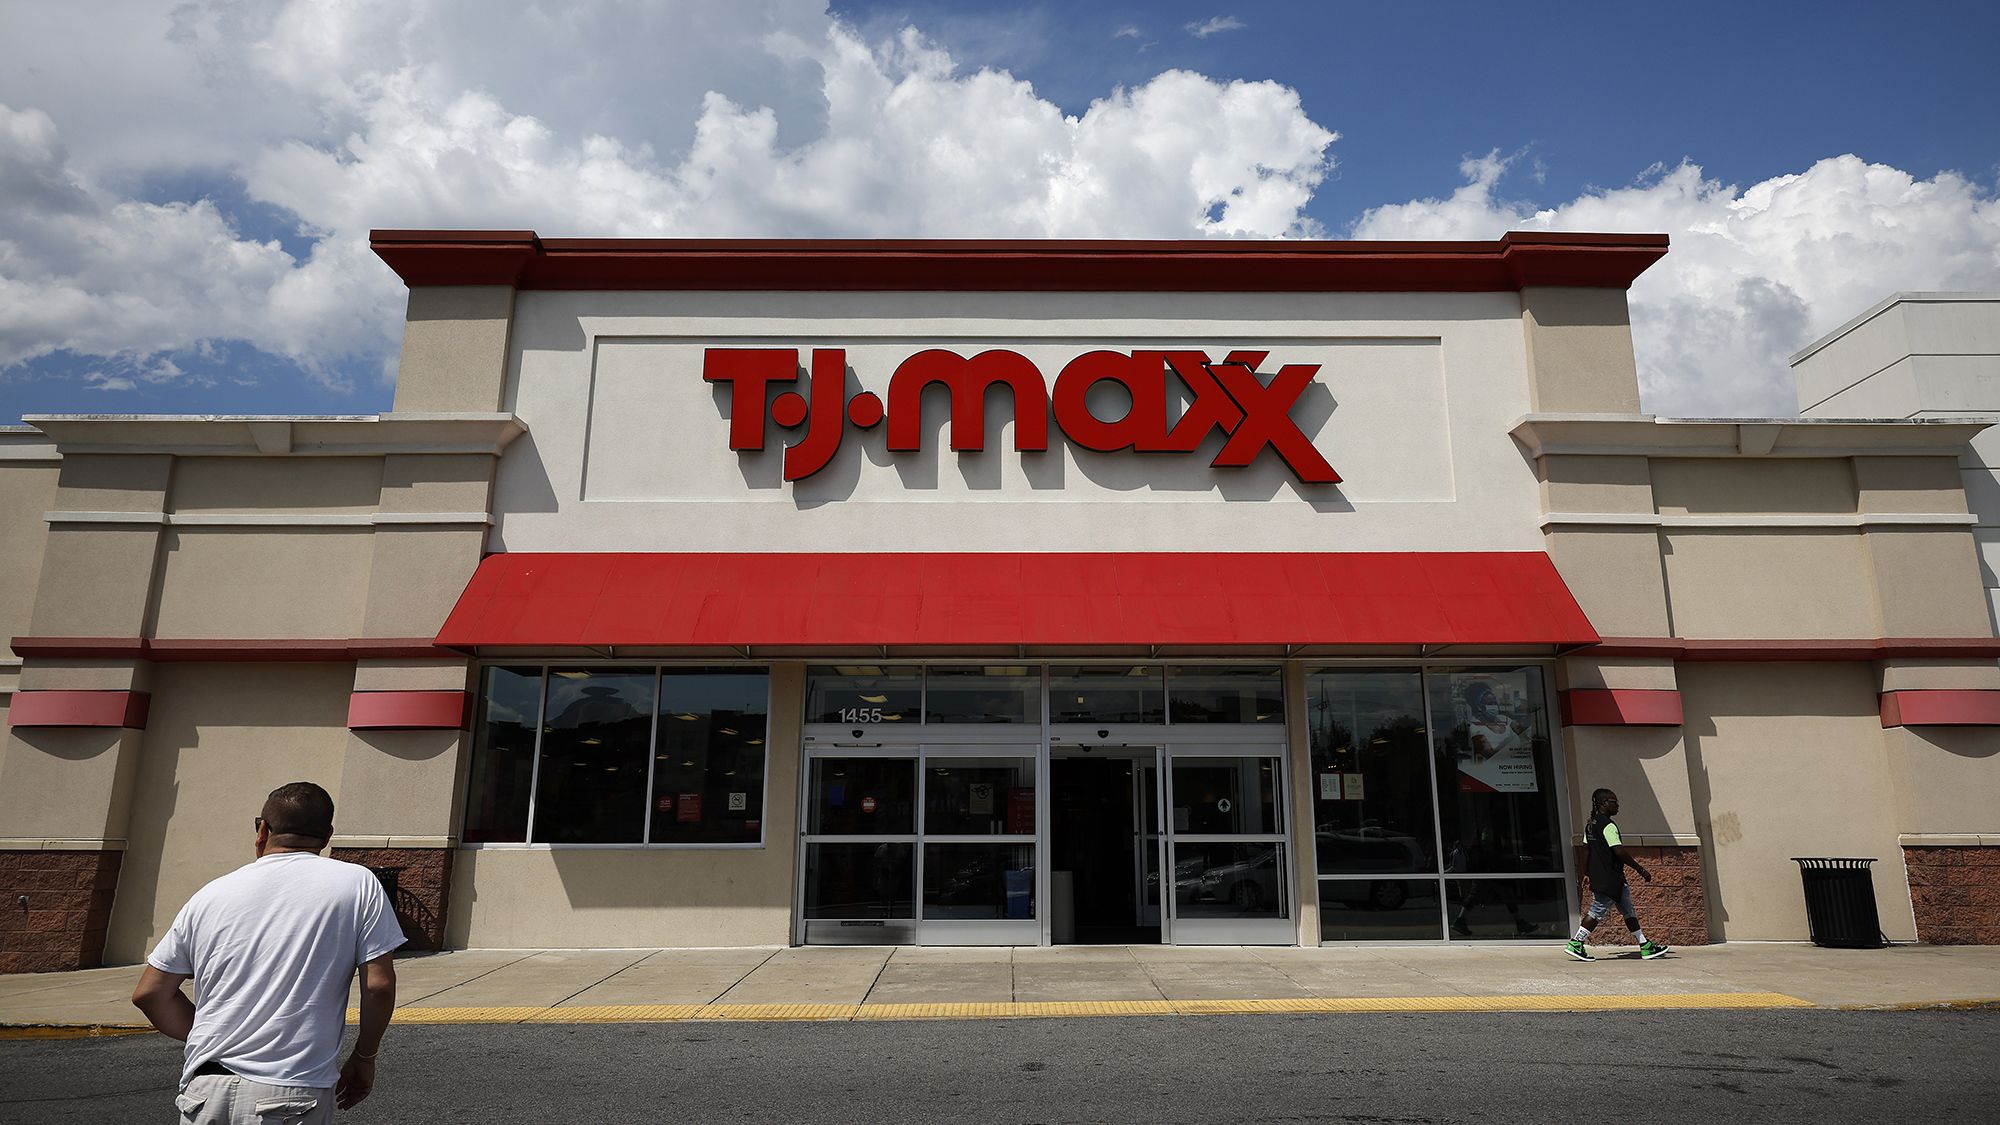 TJ Maxx rejects Yeezy brand amid Kanye West fallout